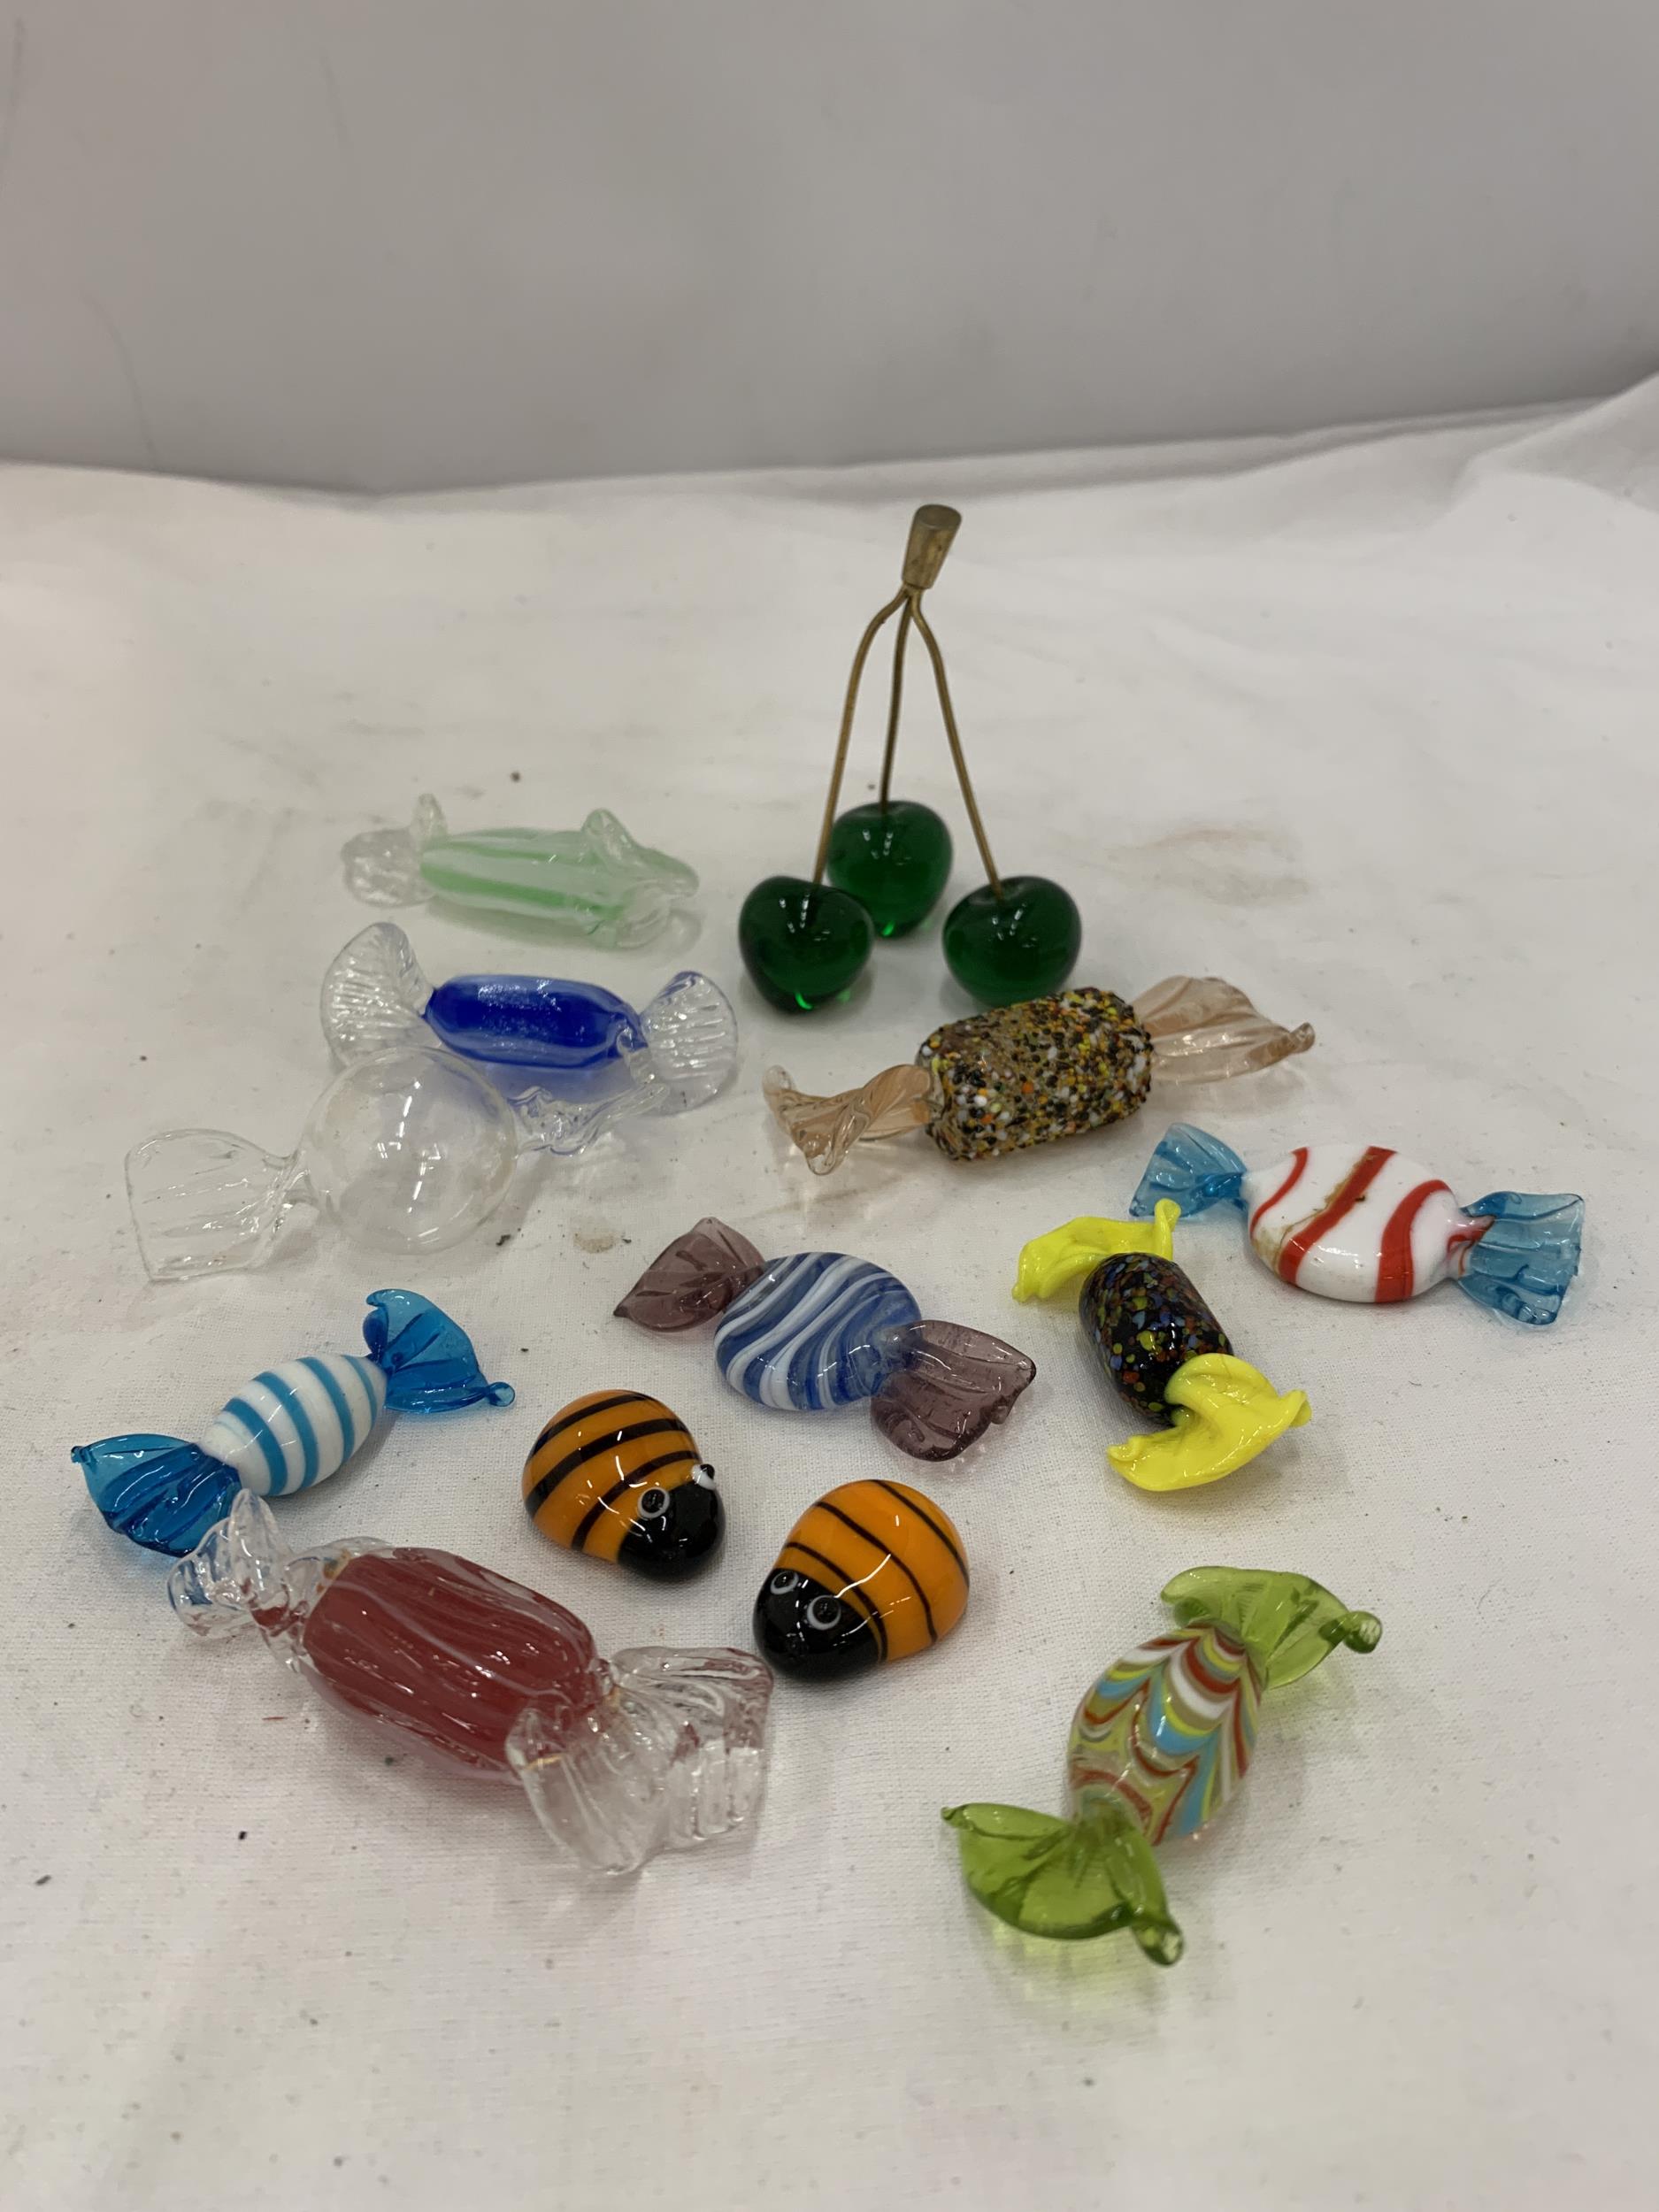 TEN MURANO STYLE GLASS SWEETS, PLUS CHERRIES AND TWO GLASS BEES - Image 2 of 2